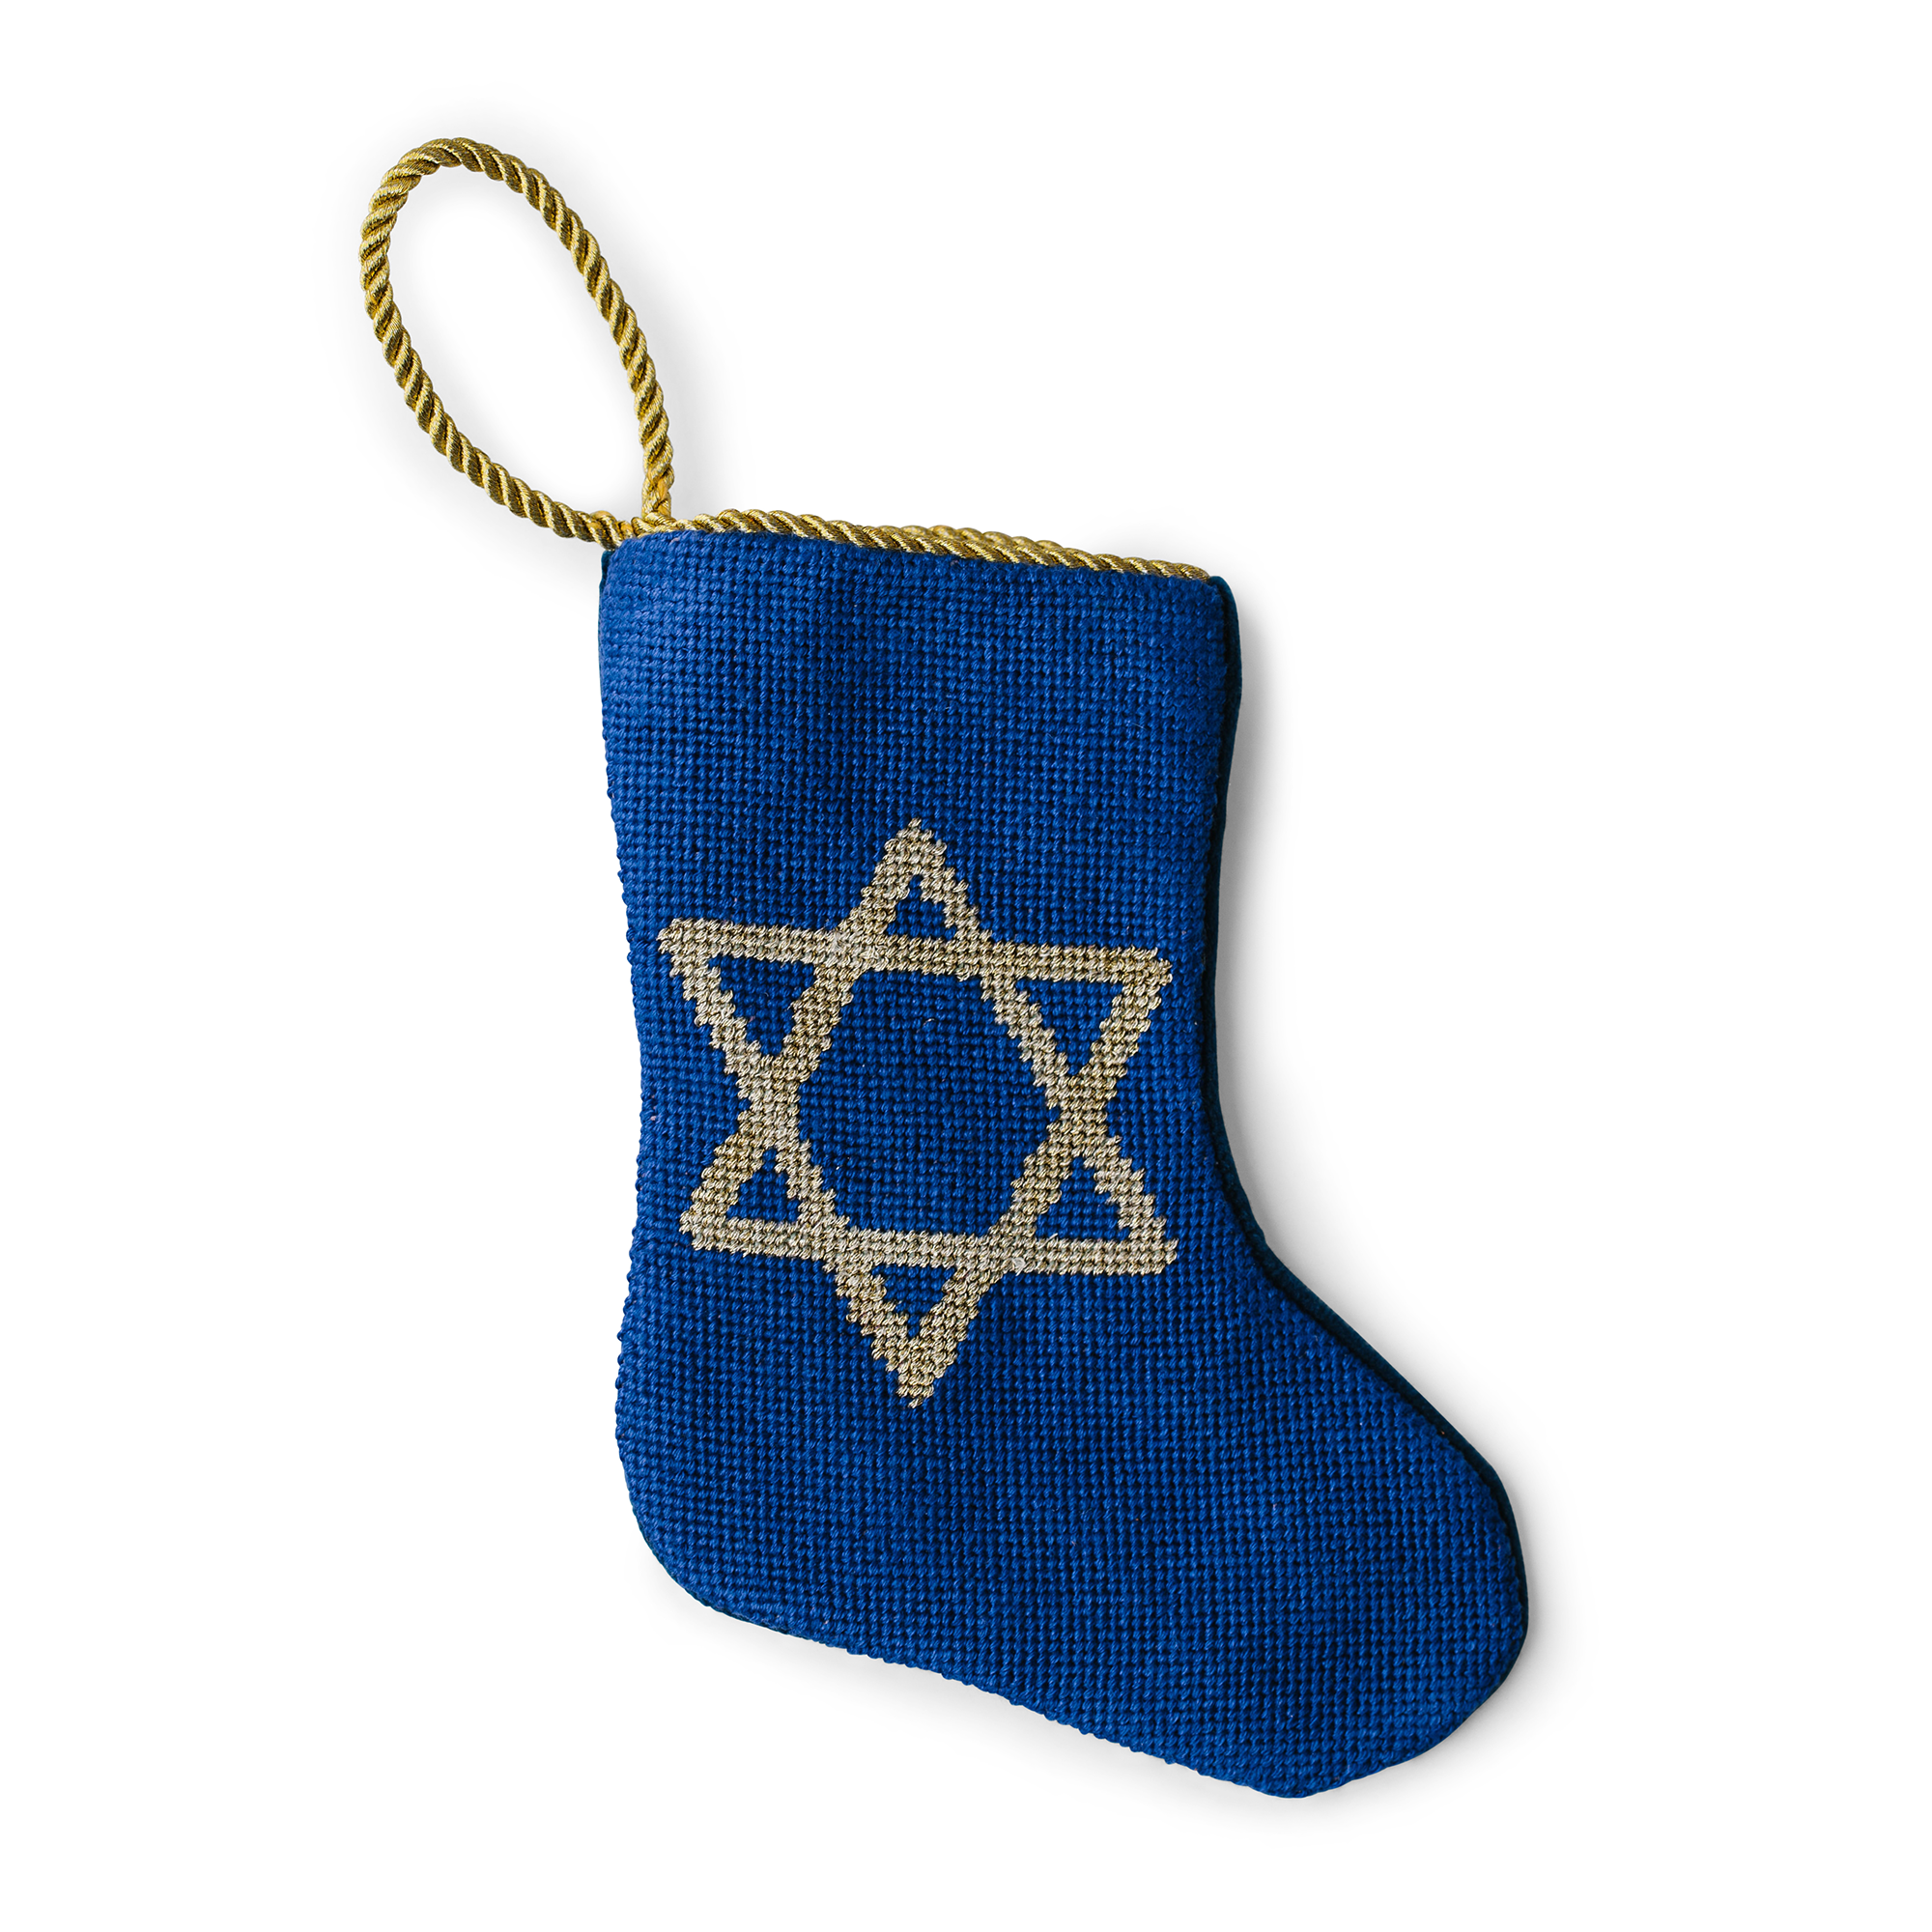 A charming Christmas stocking, featuring a golden Star of David on dark blue. A gold loop at the top, is making it perfect as tree ornament, place setting, or for hanging by the fireplace.